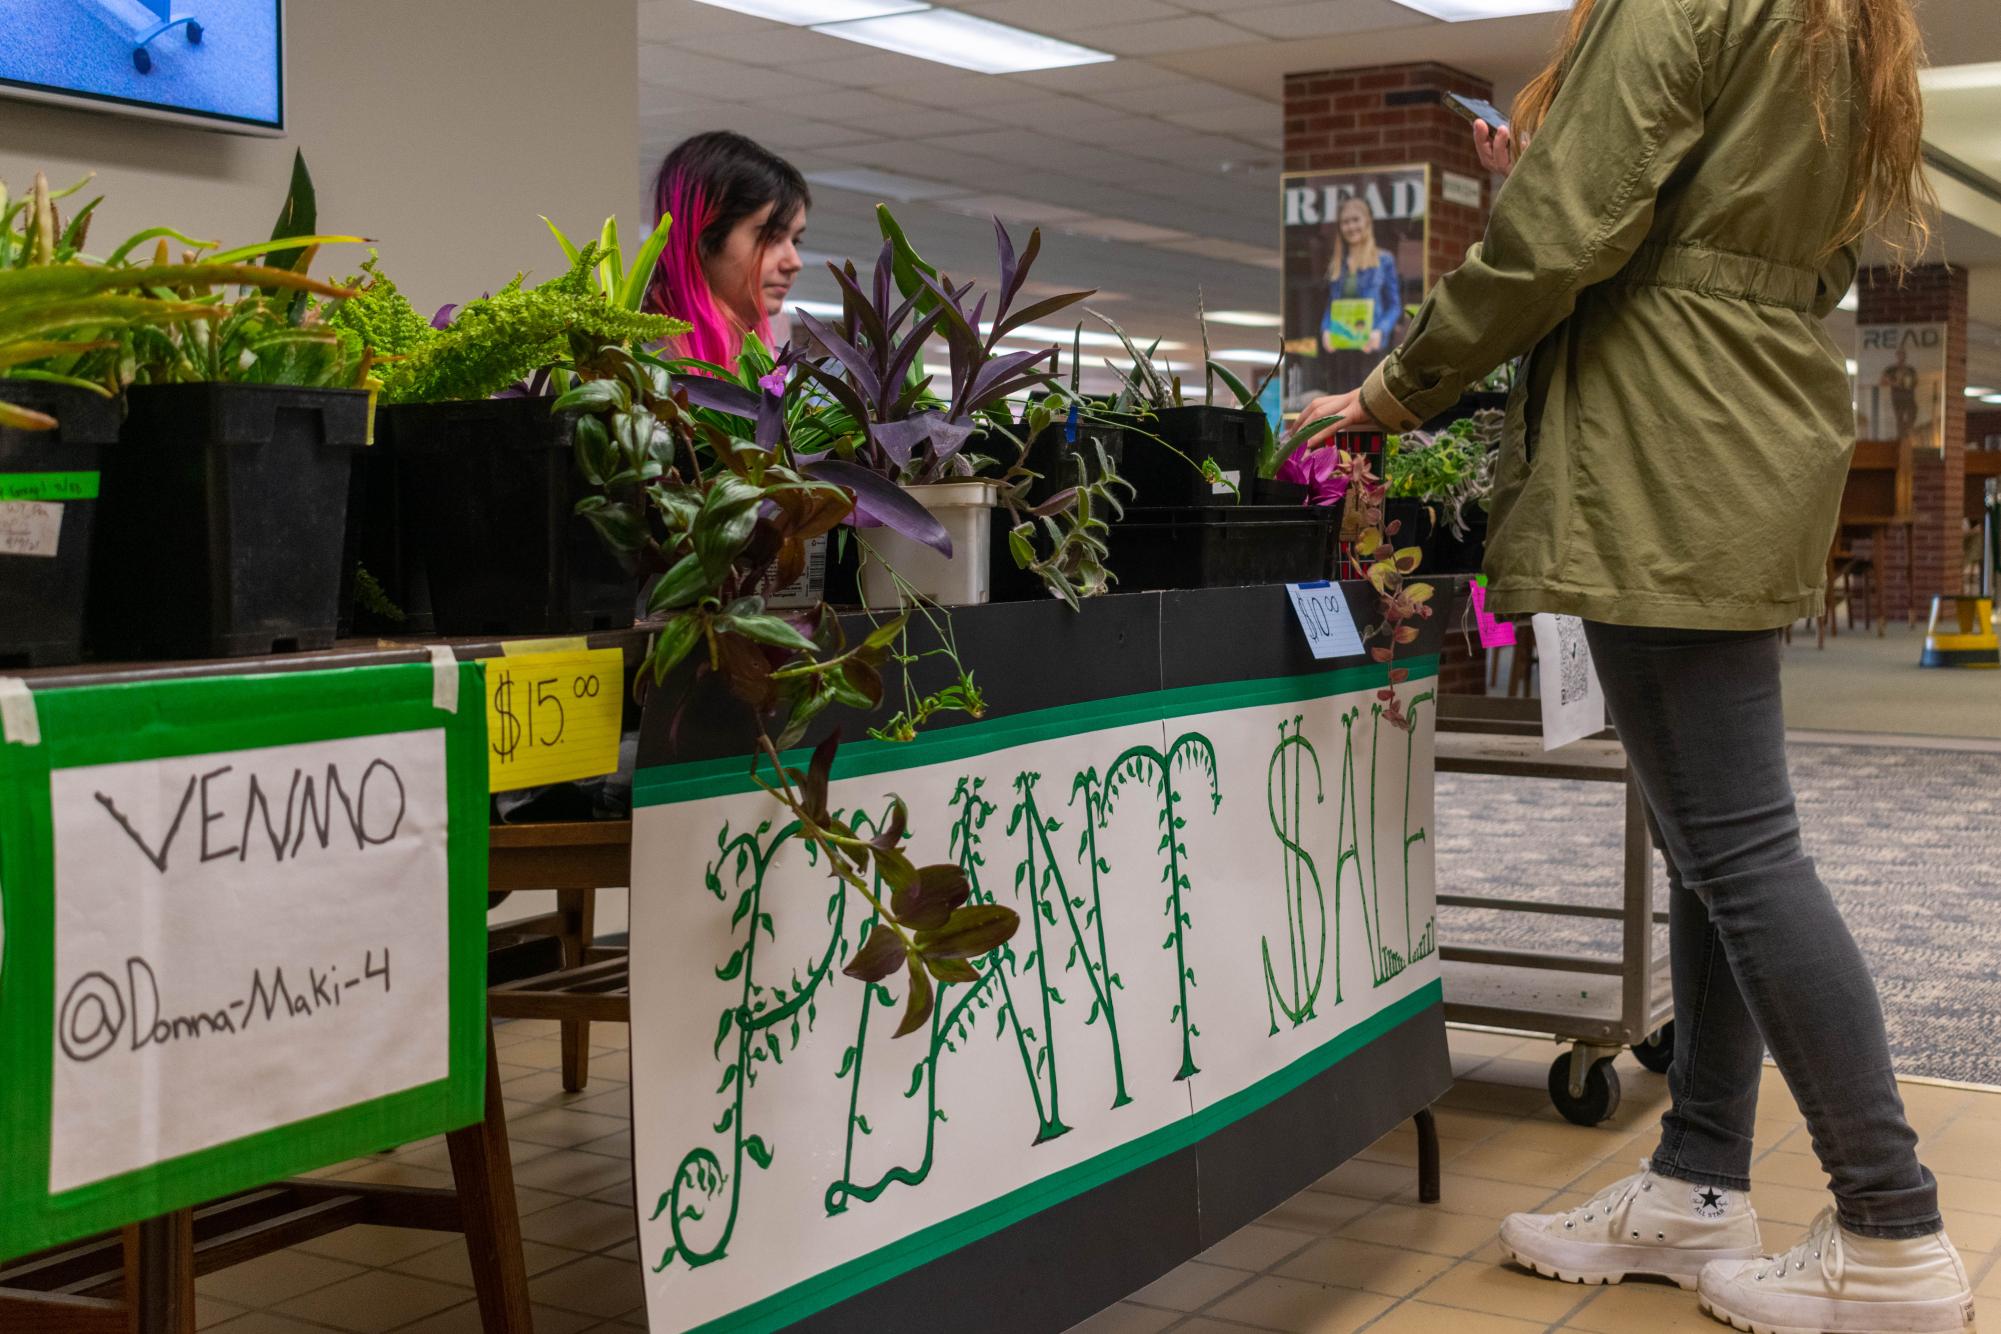 Students can peruse and purchase plants propagated by teaching staff at the campus greenhouse. The sale runs through this week.